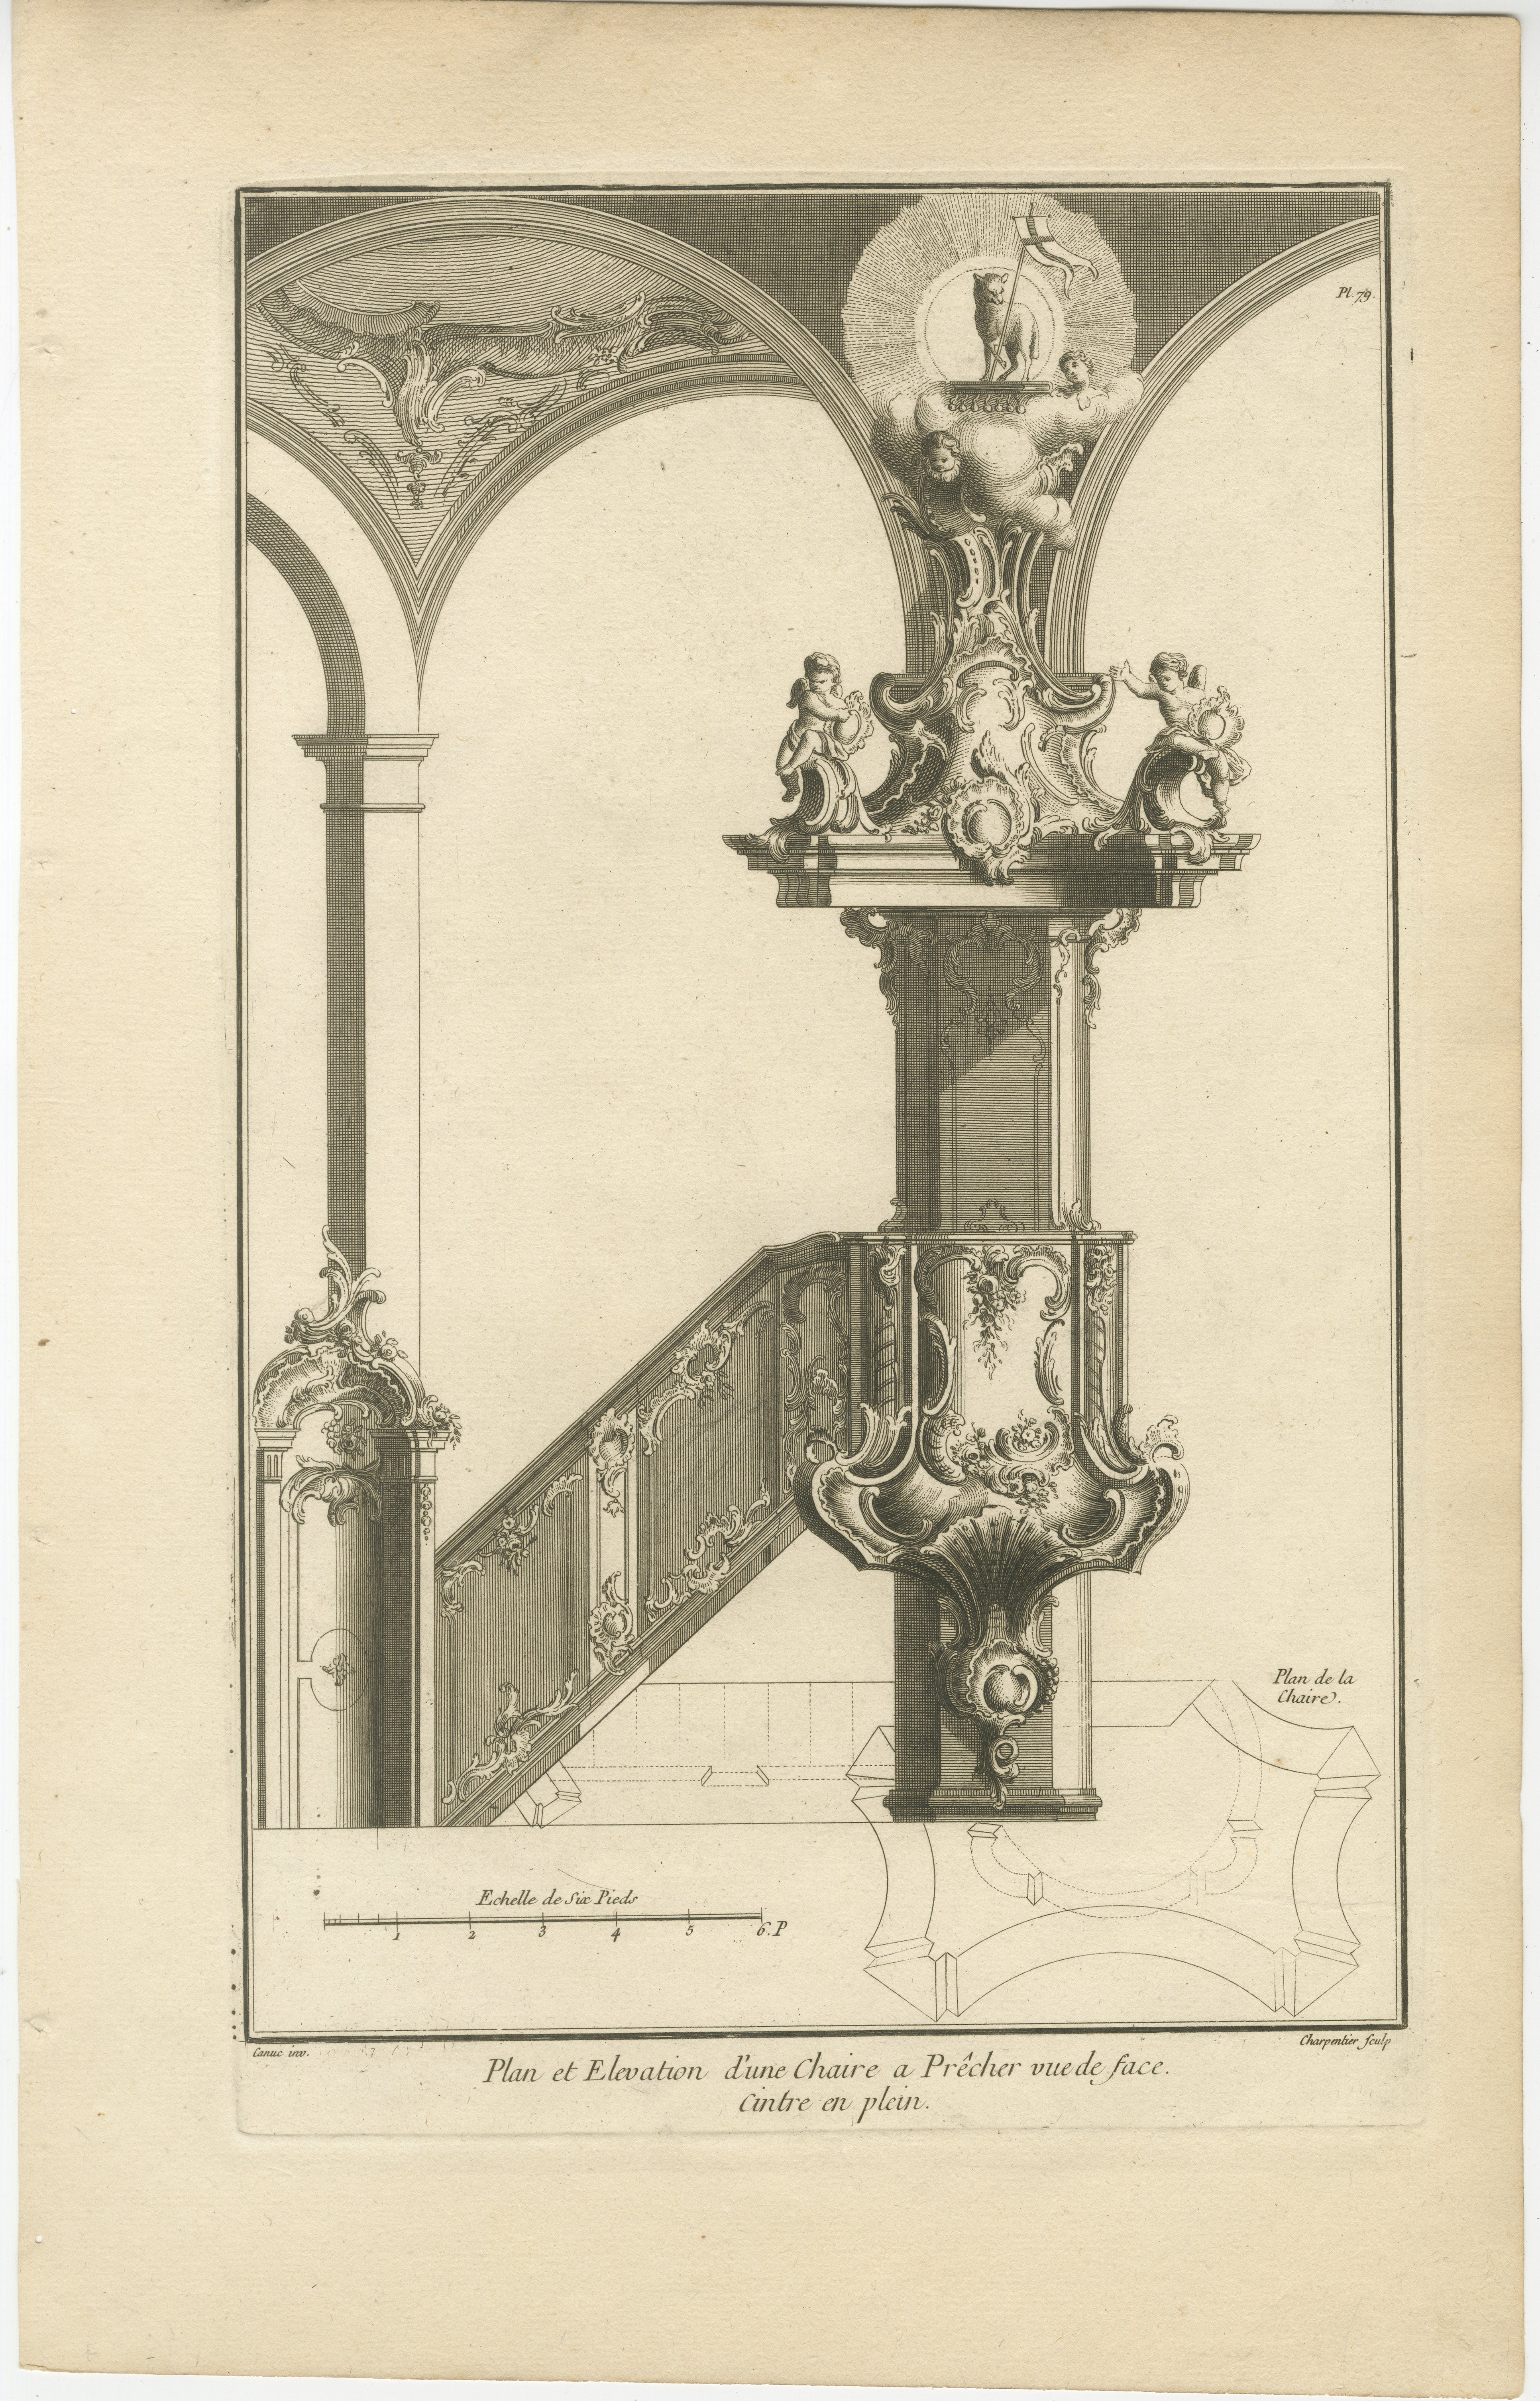 This is an original antique architectural design for a pulpit in baroque style with archway and balustrade dating approximately between 1740 and 1760. 

The artist responsible for this design is Franz Xaver Habermann, and it was published by Johann